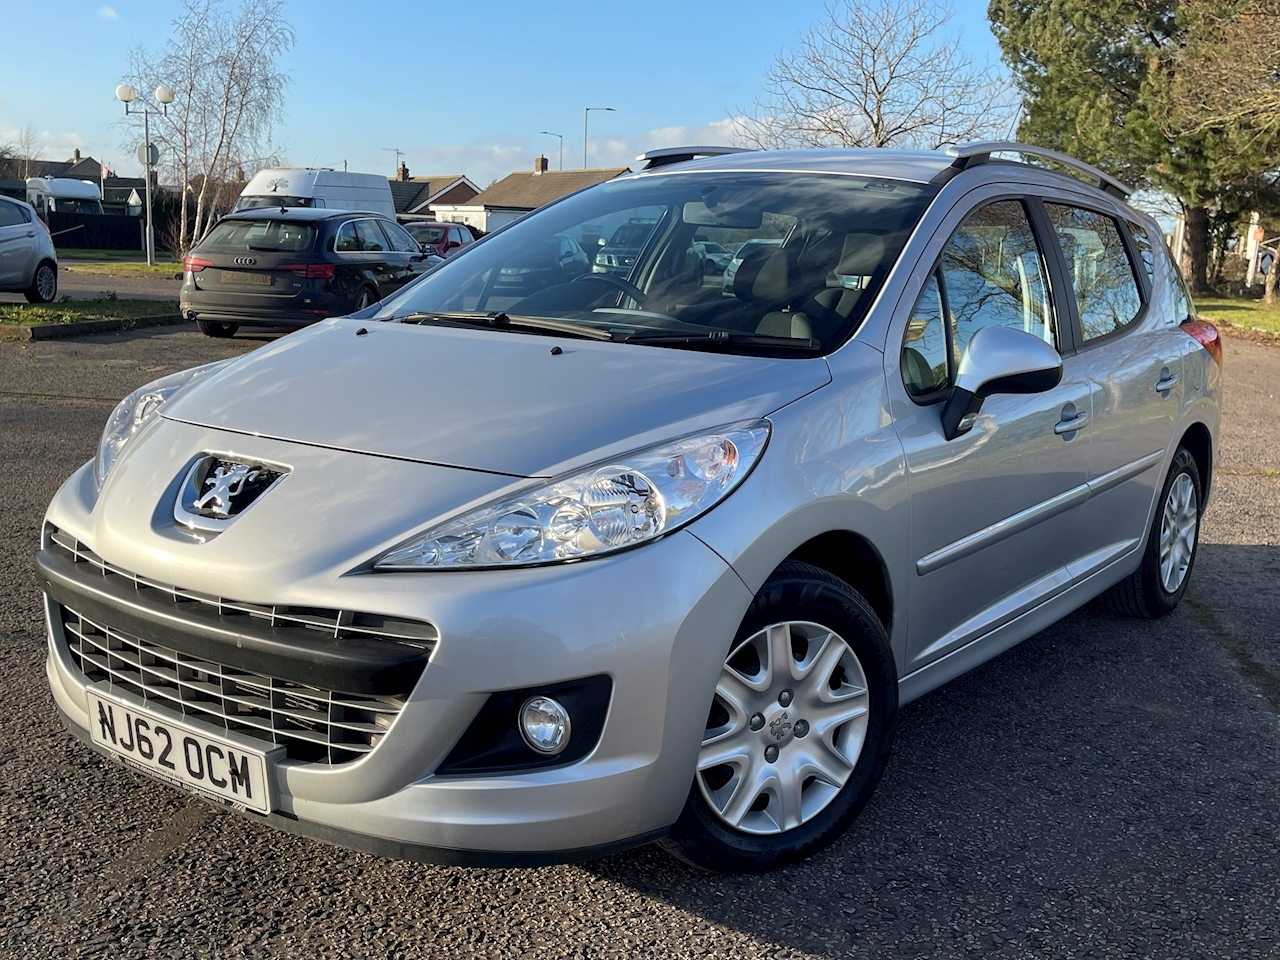 Used Peugeot 207 sw 1.6 HDi Allure Euro 5 5dr 2012 5dr Manual (FD12ORZ)